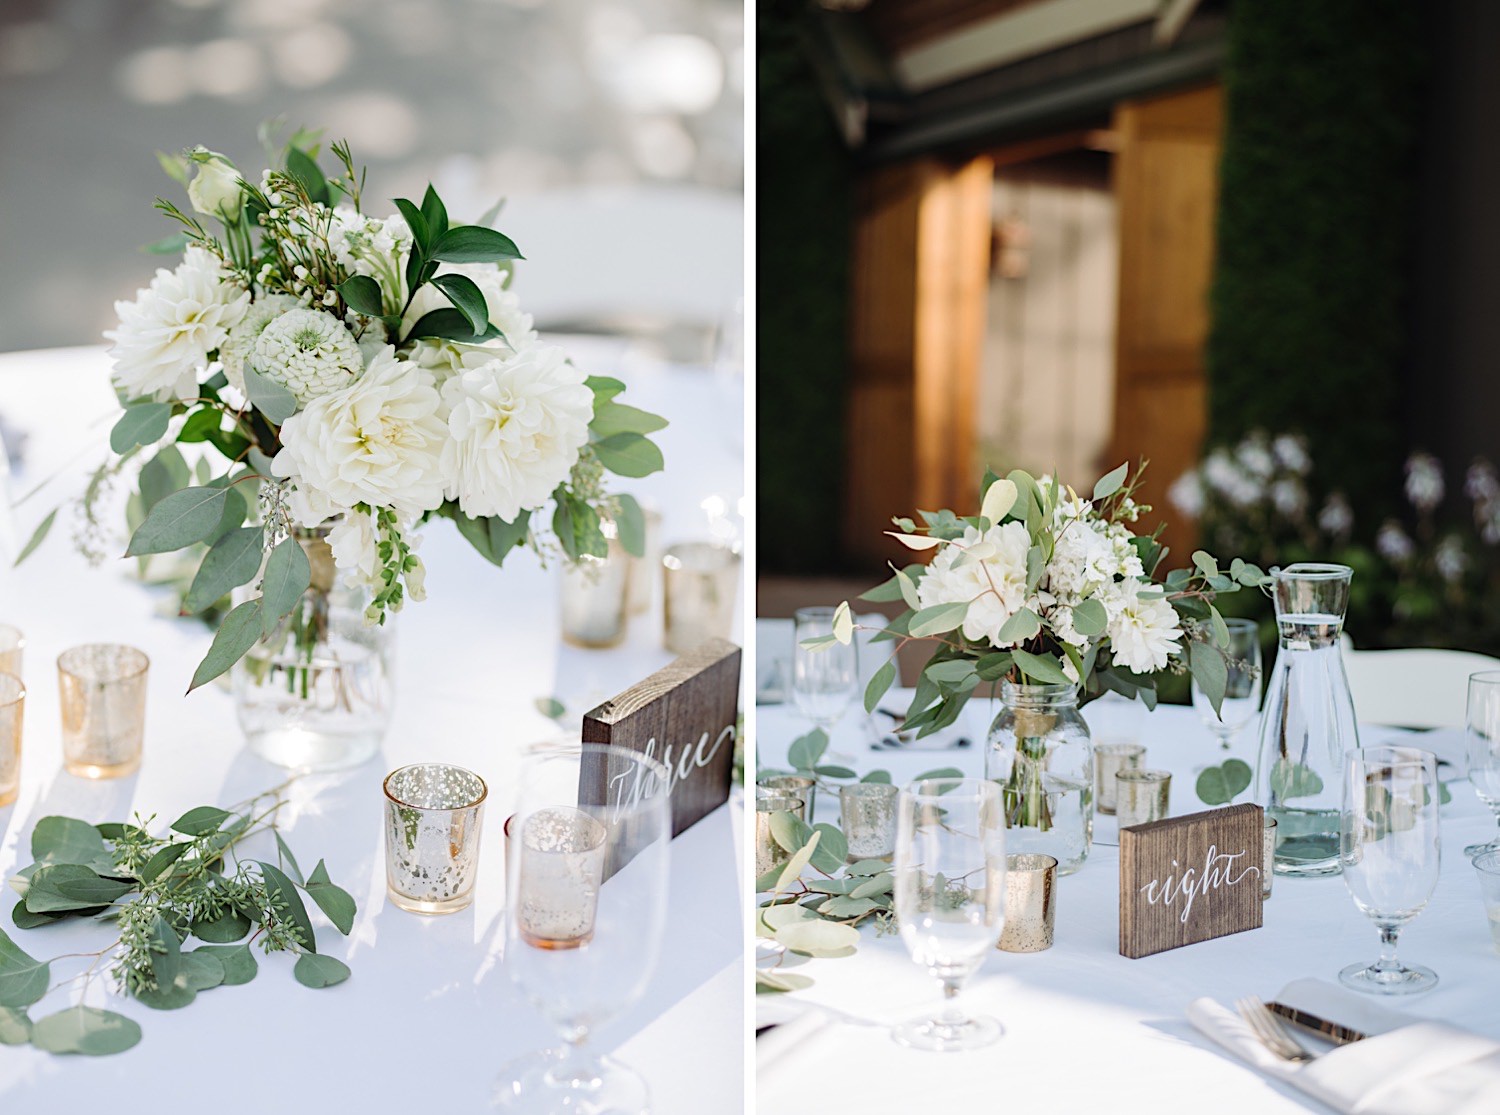 flowers and wedding decor at Pine Creek Farms and Nursery